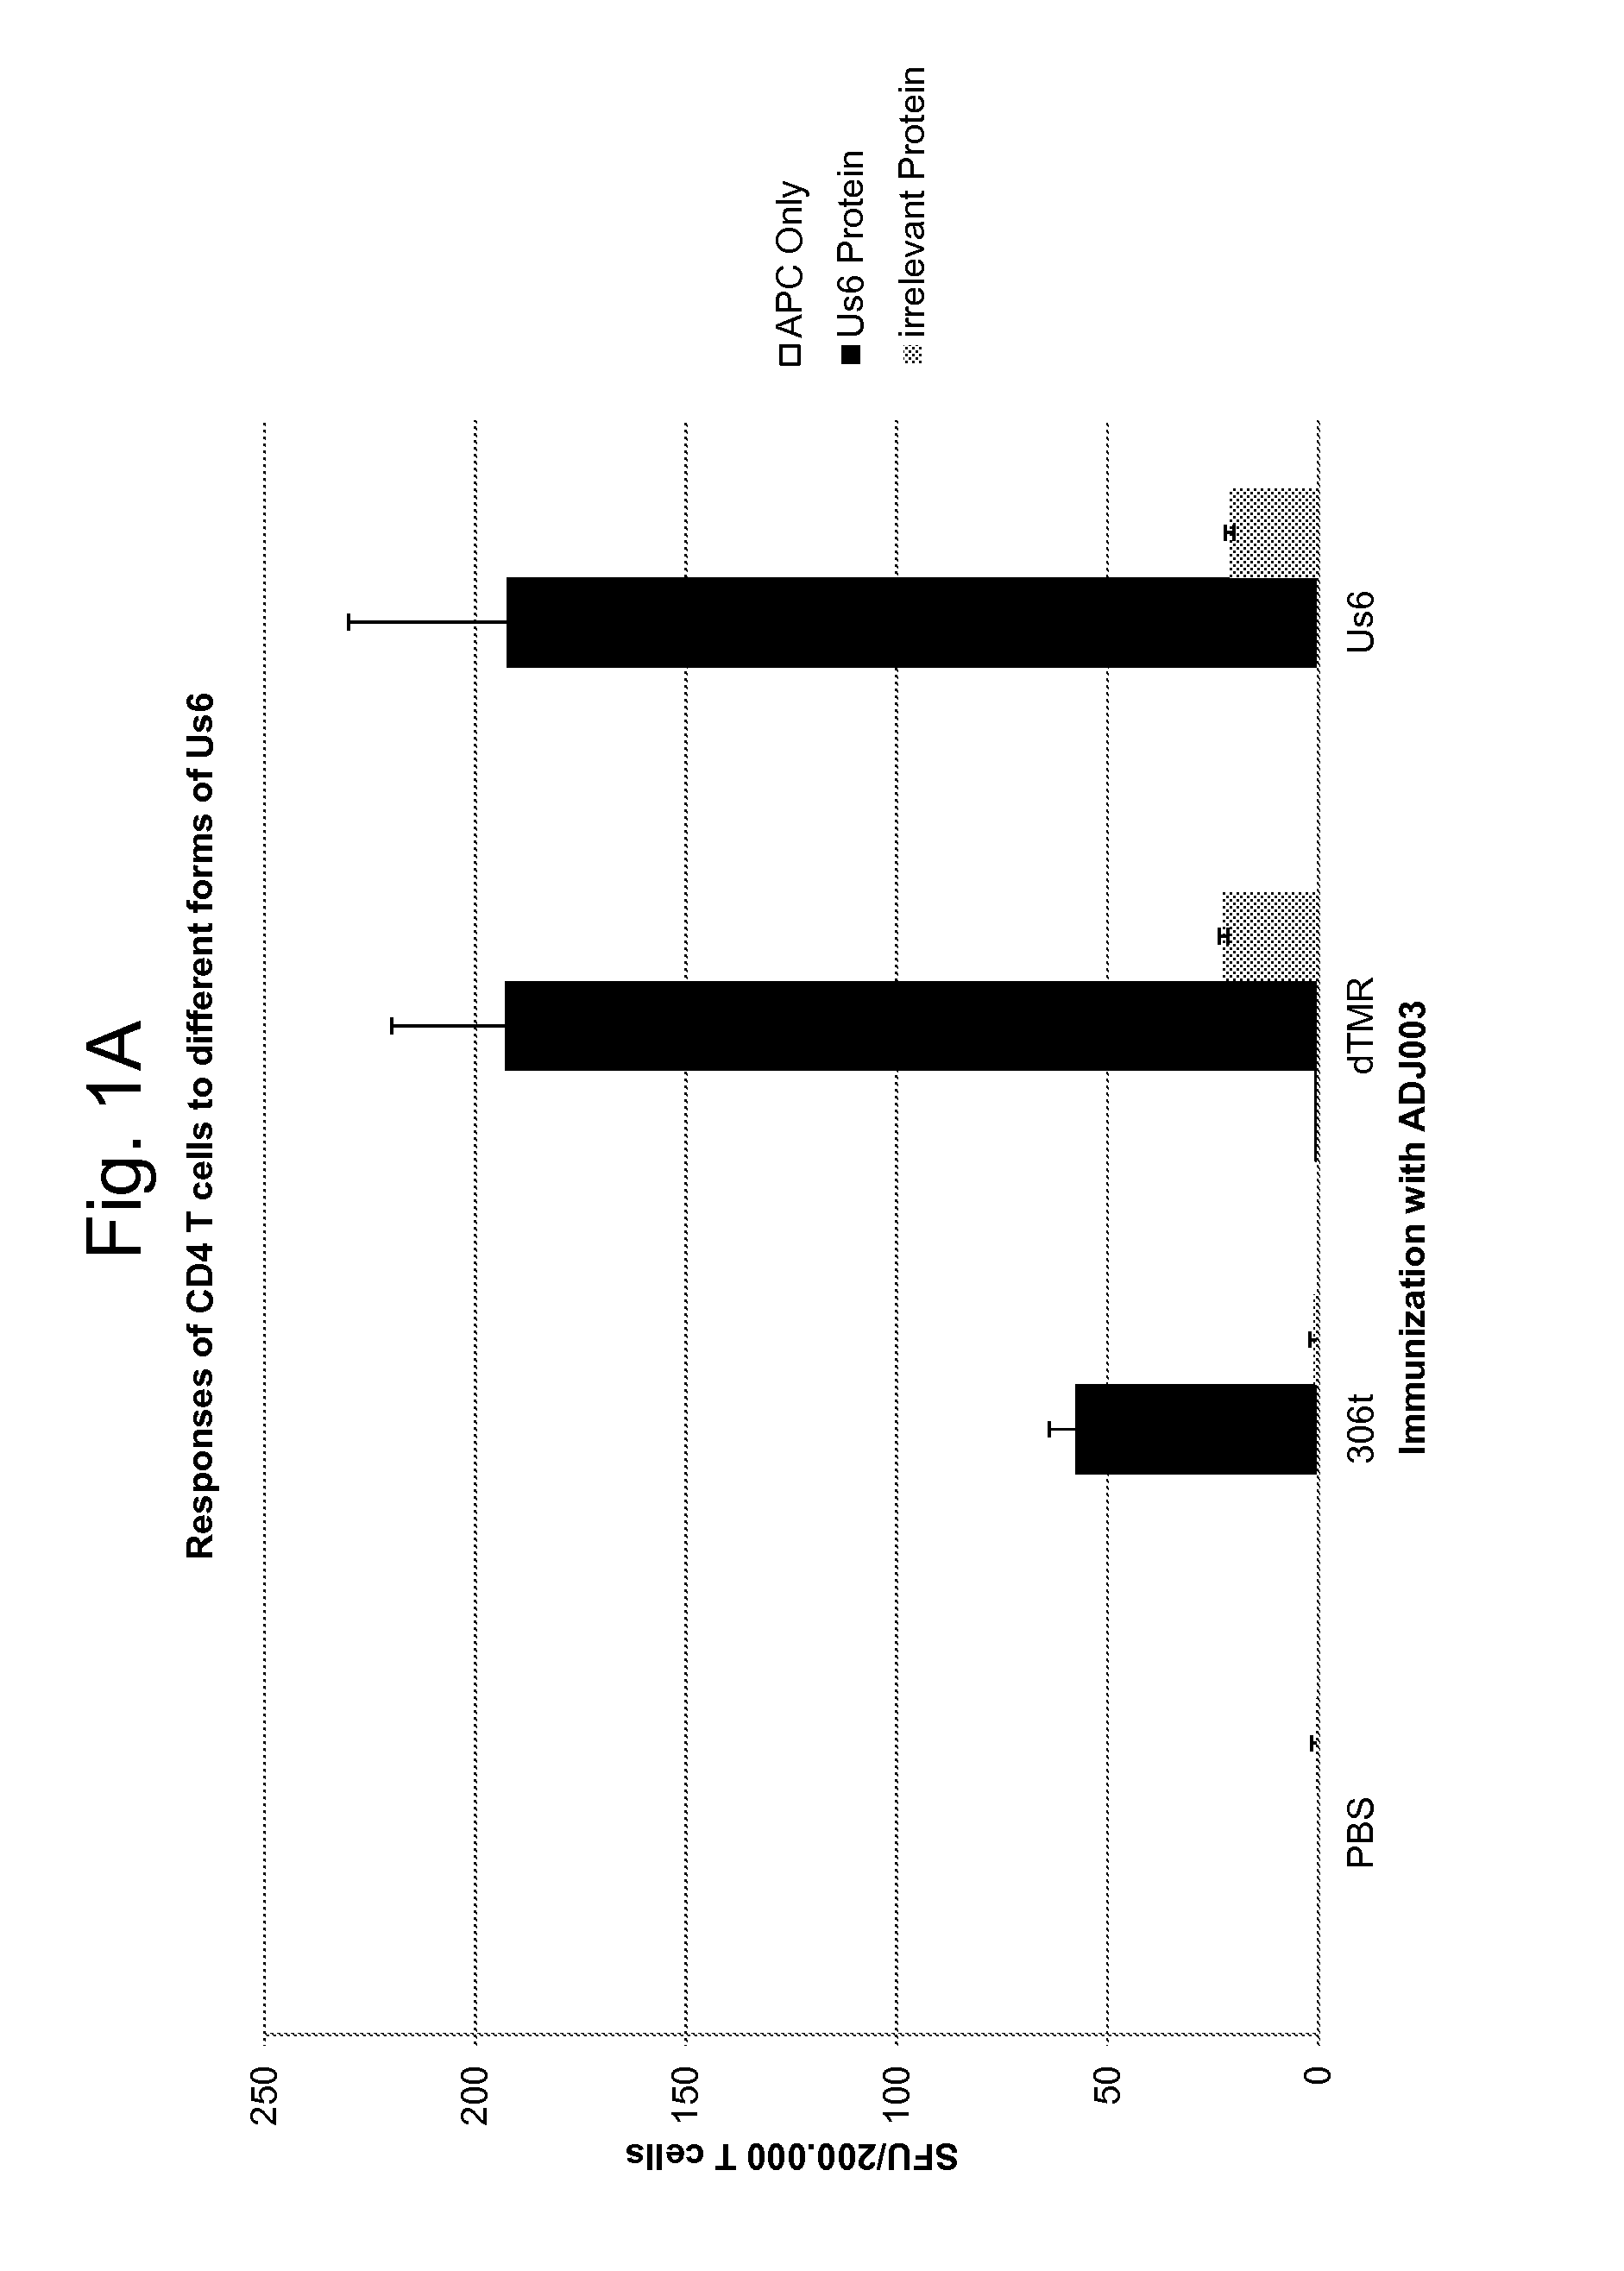 Vaccines against herpes simplex virus type 2: compositions and methods for eliciting an immune response